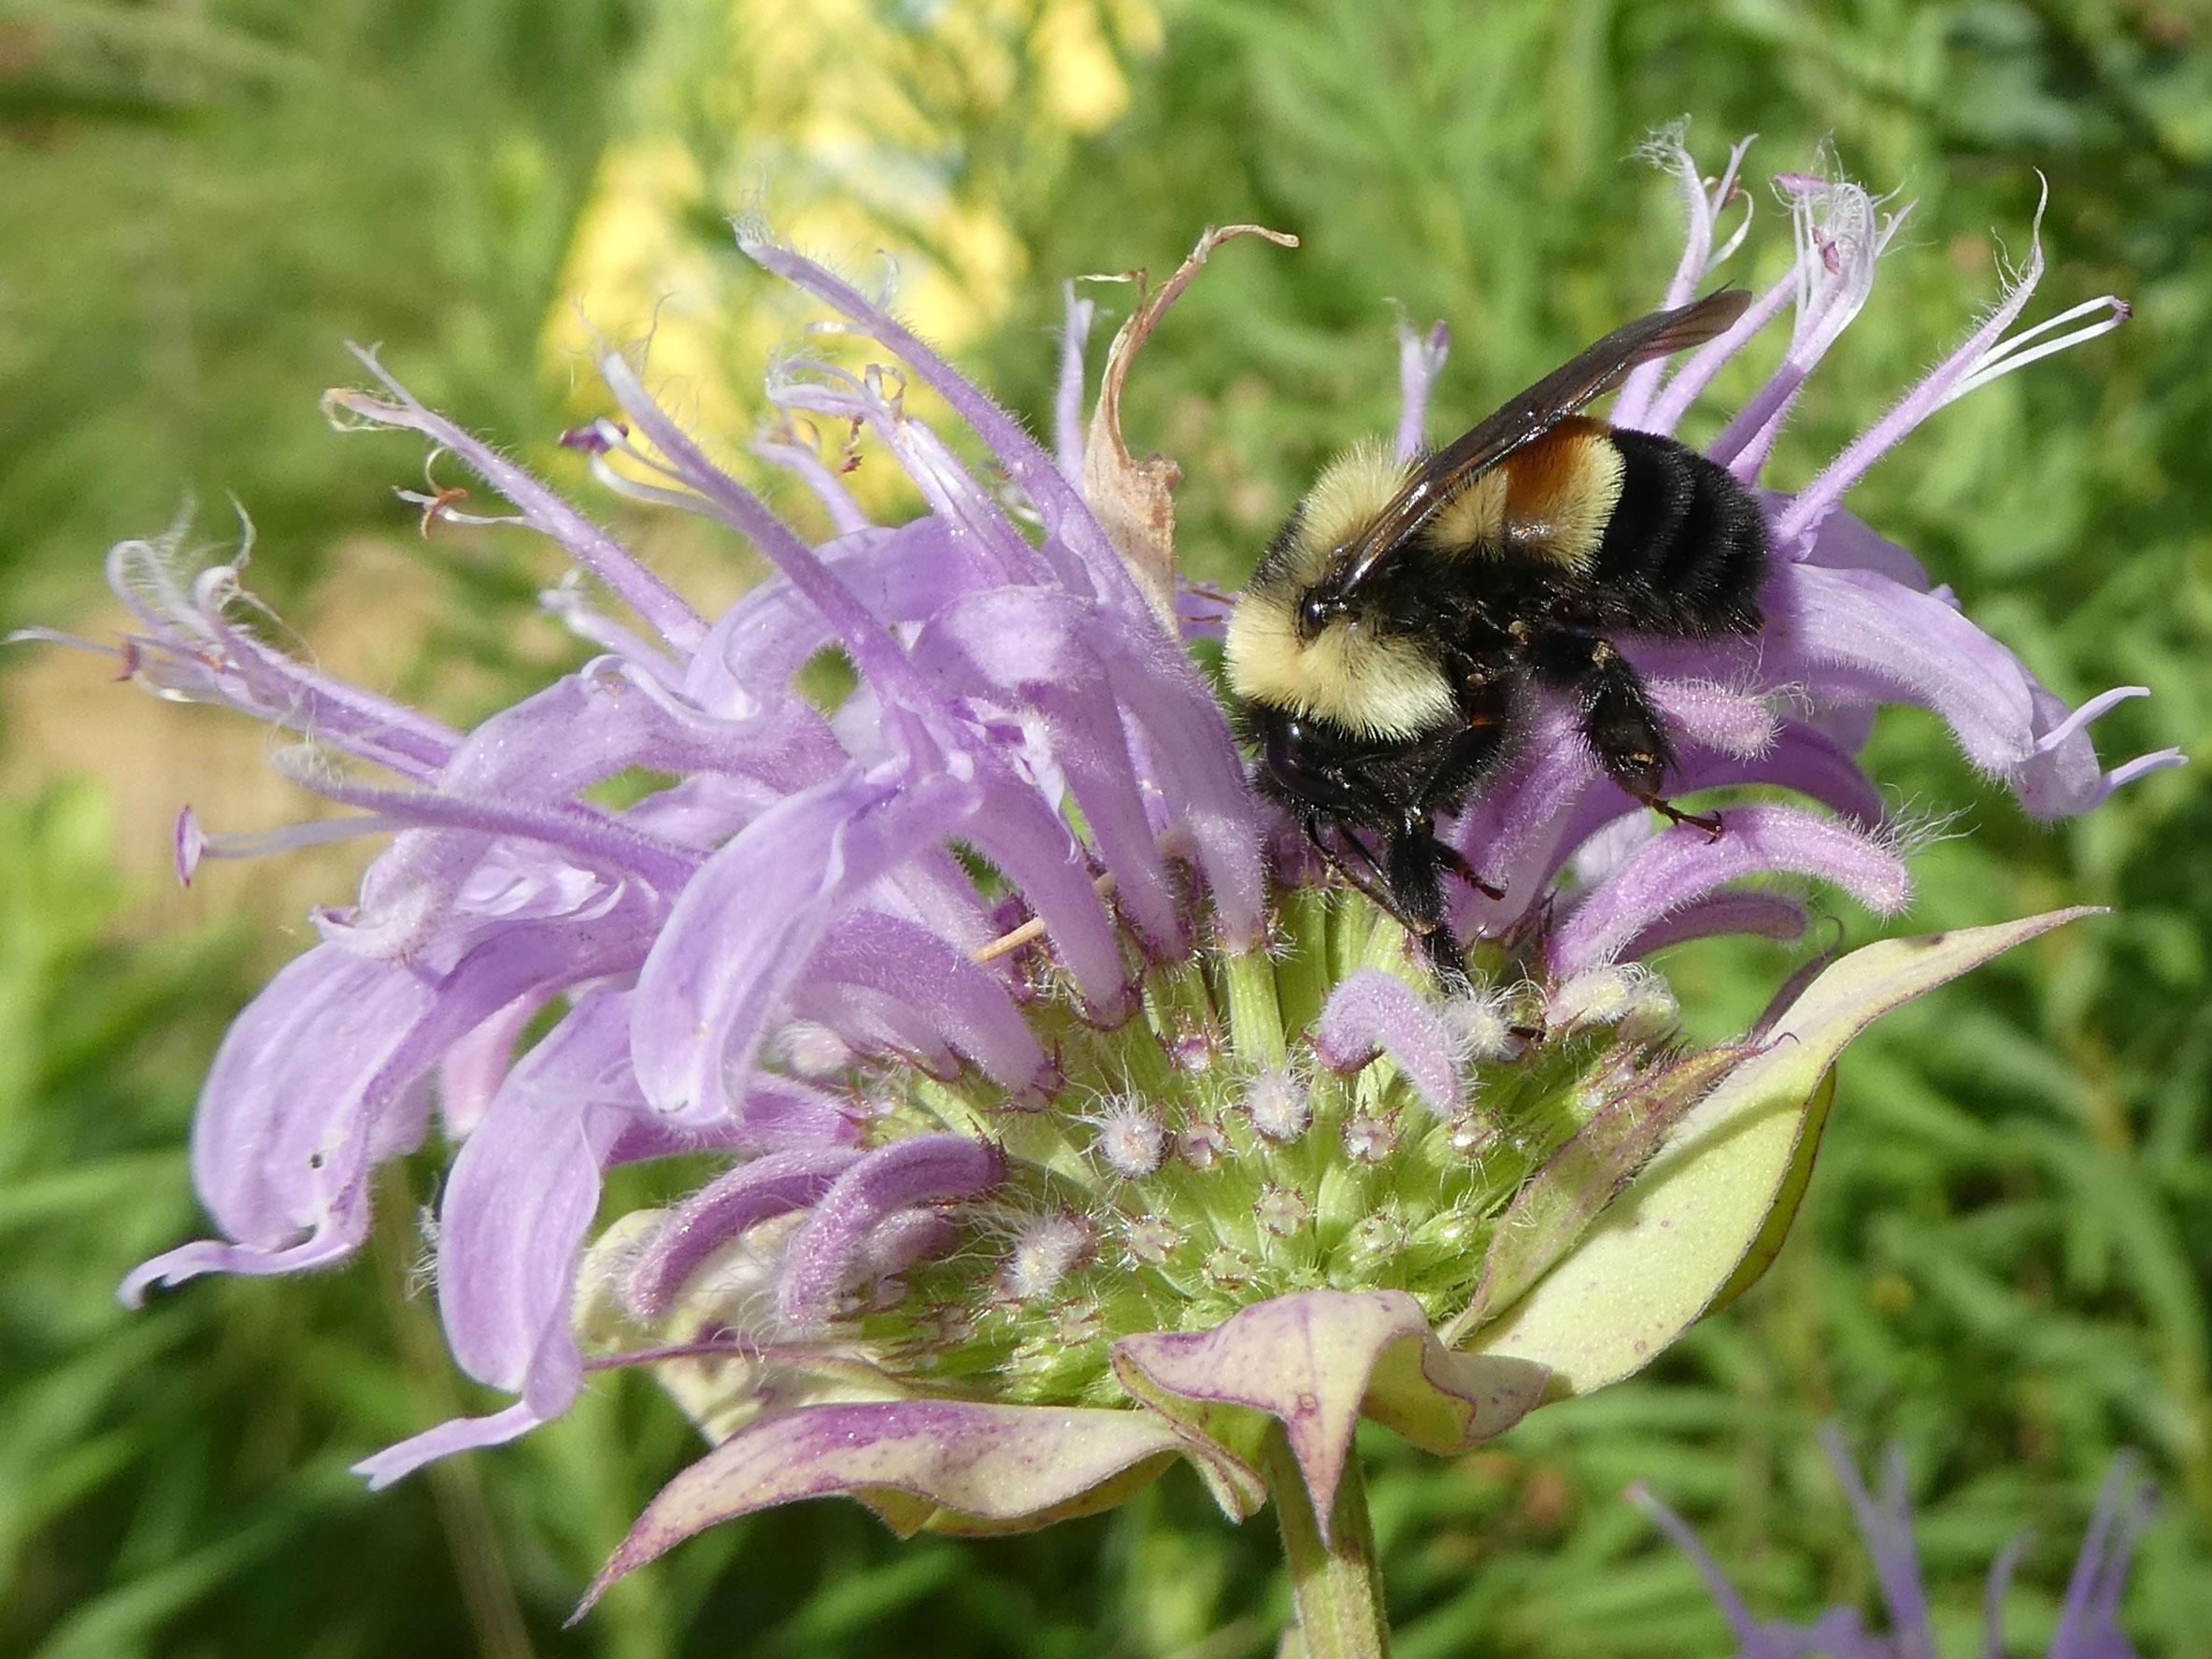 A rusty patched bumblebee next to a flower in Minnesota, US